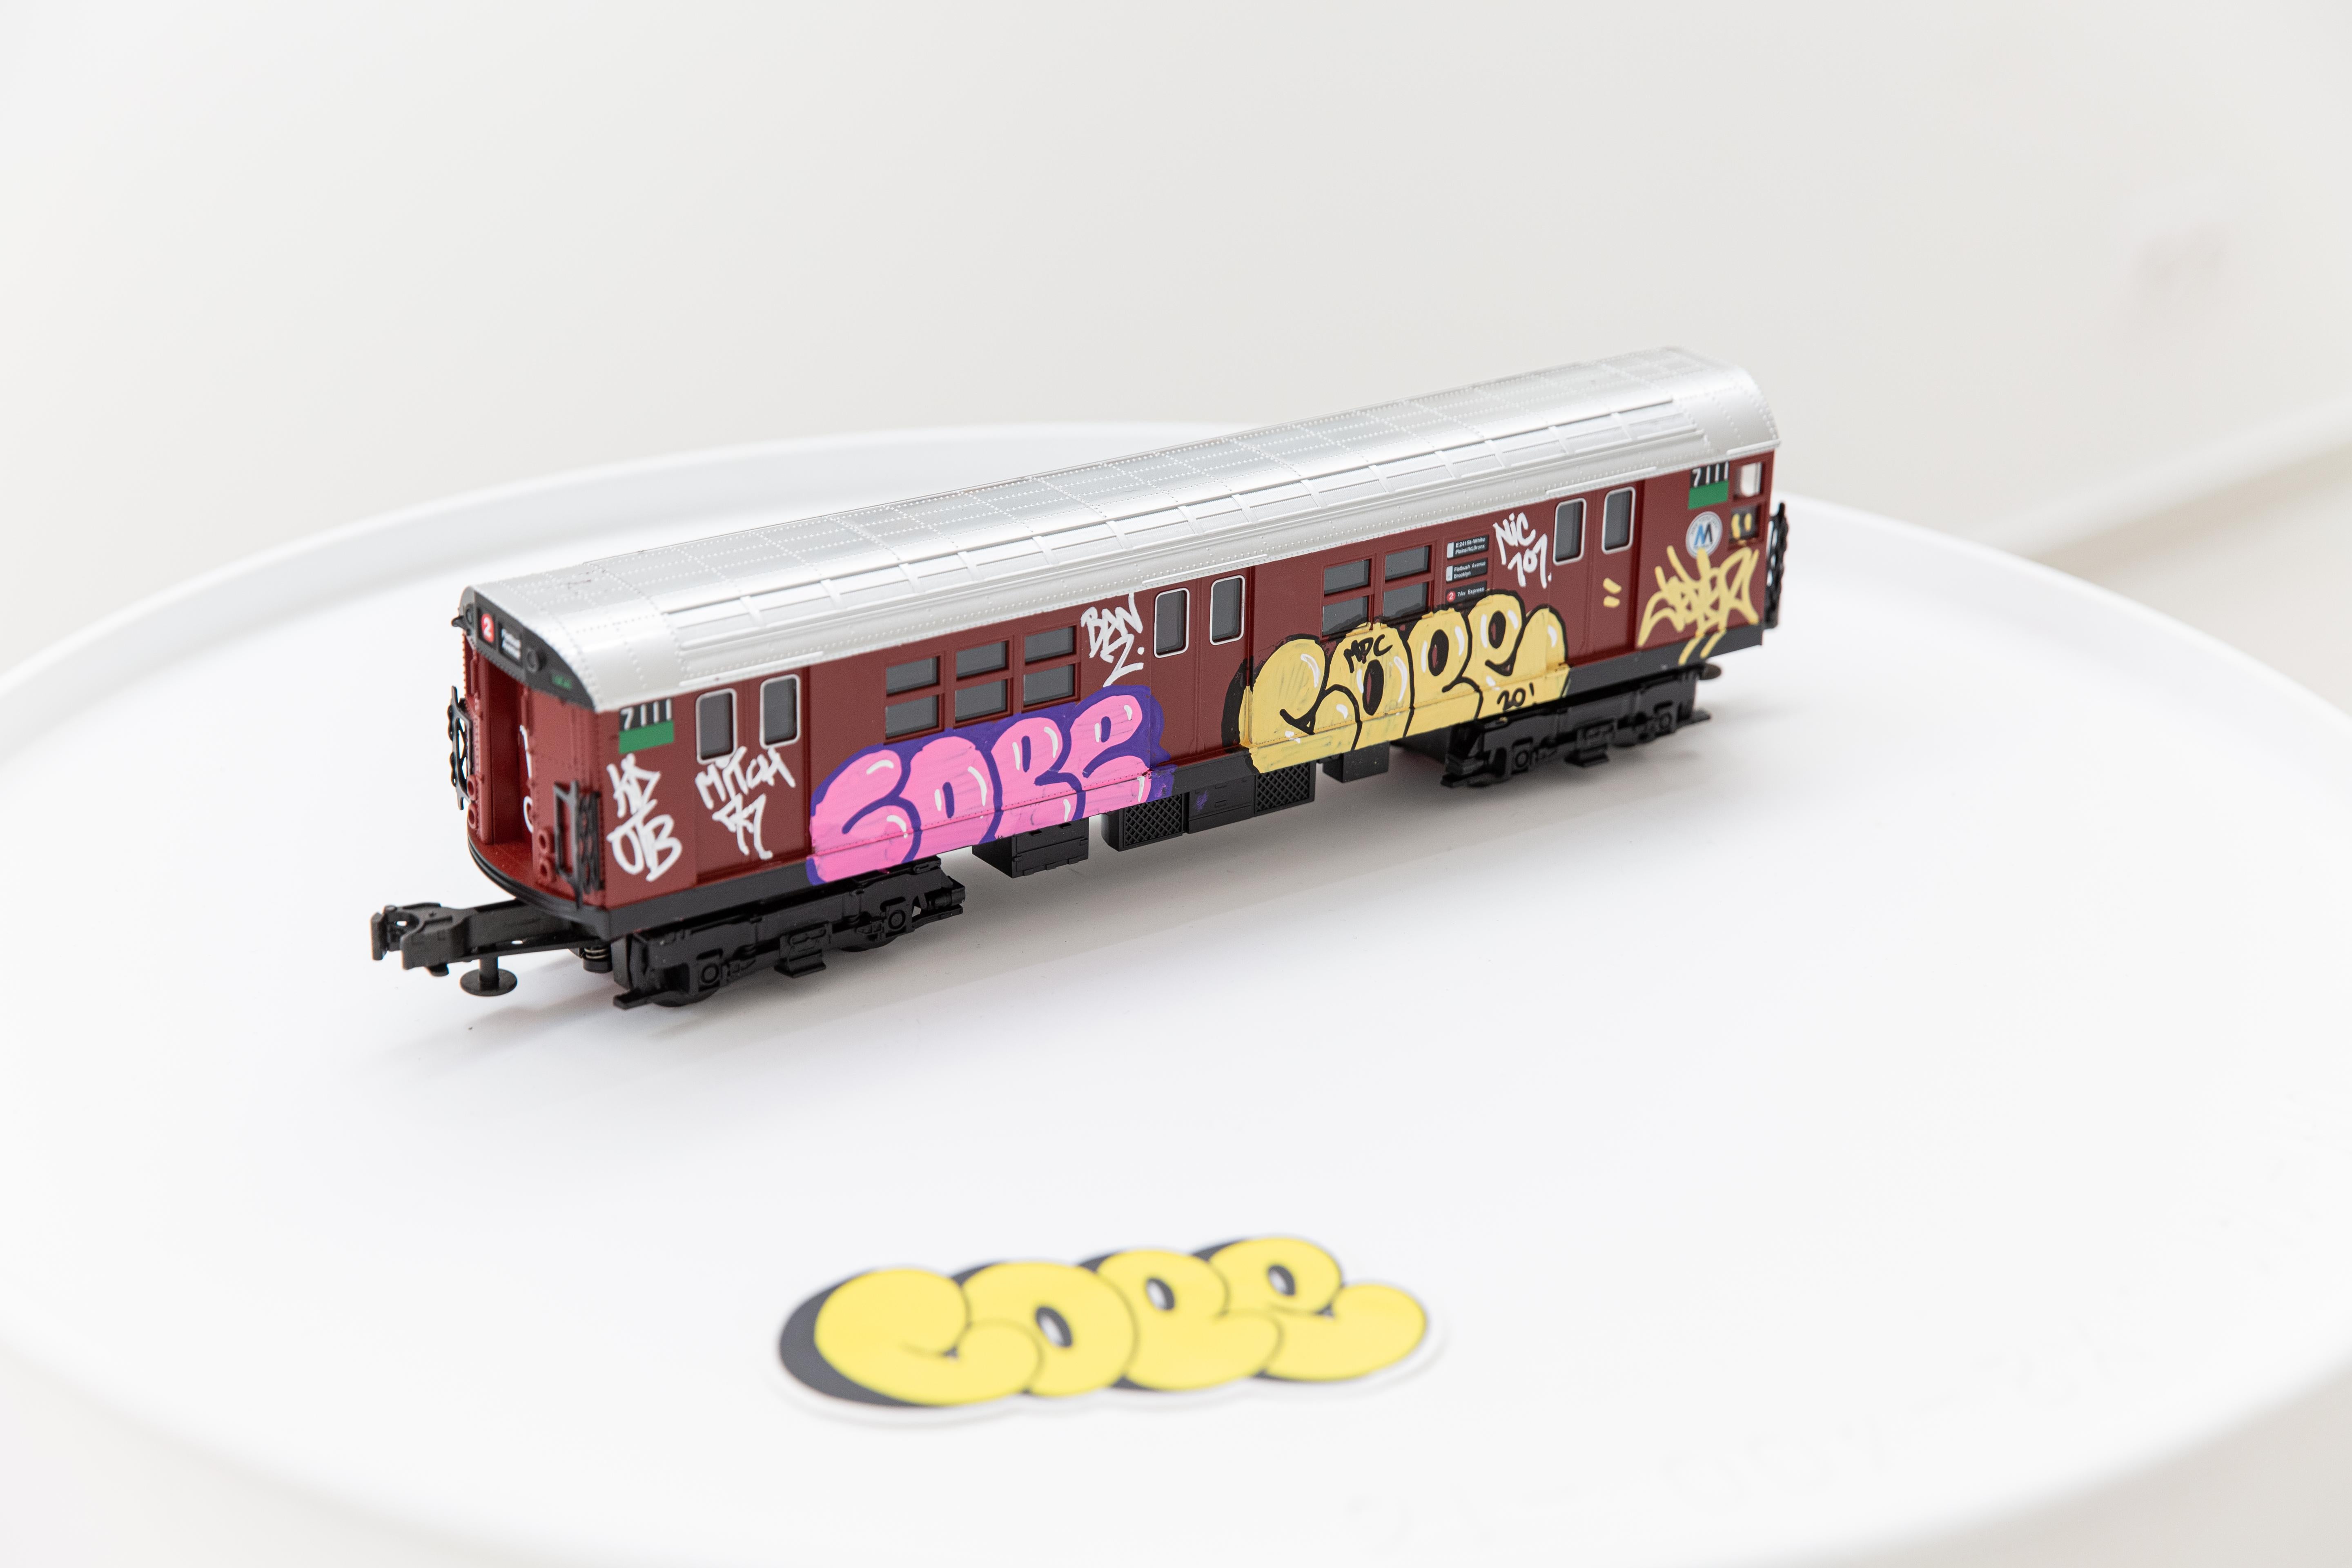 NYC Brown Train - Sculpture by Cope2